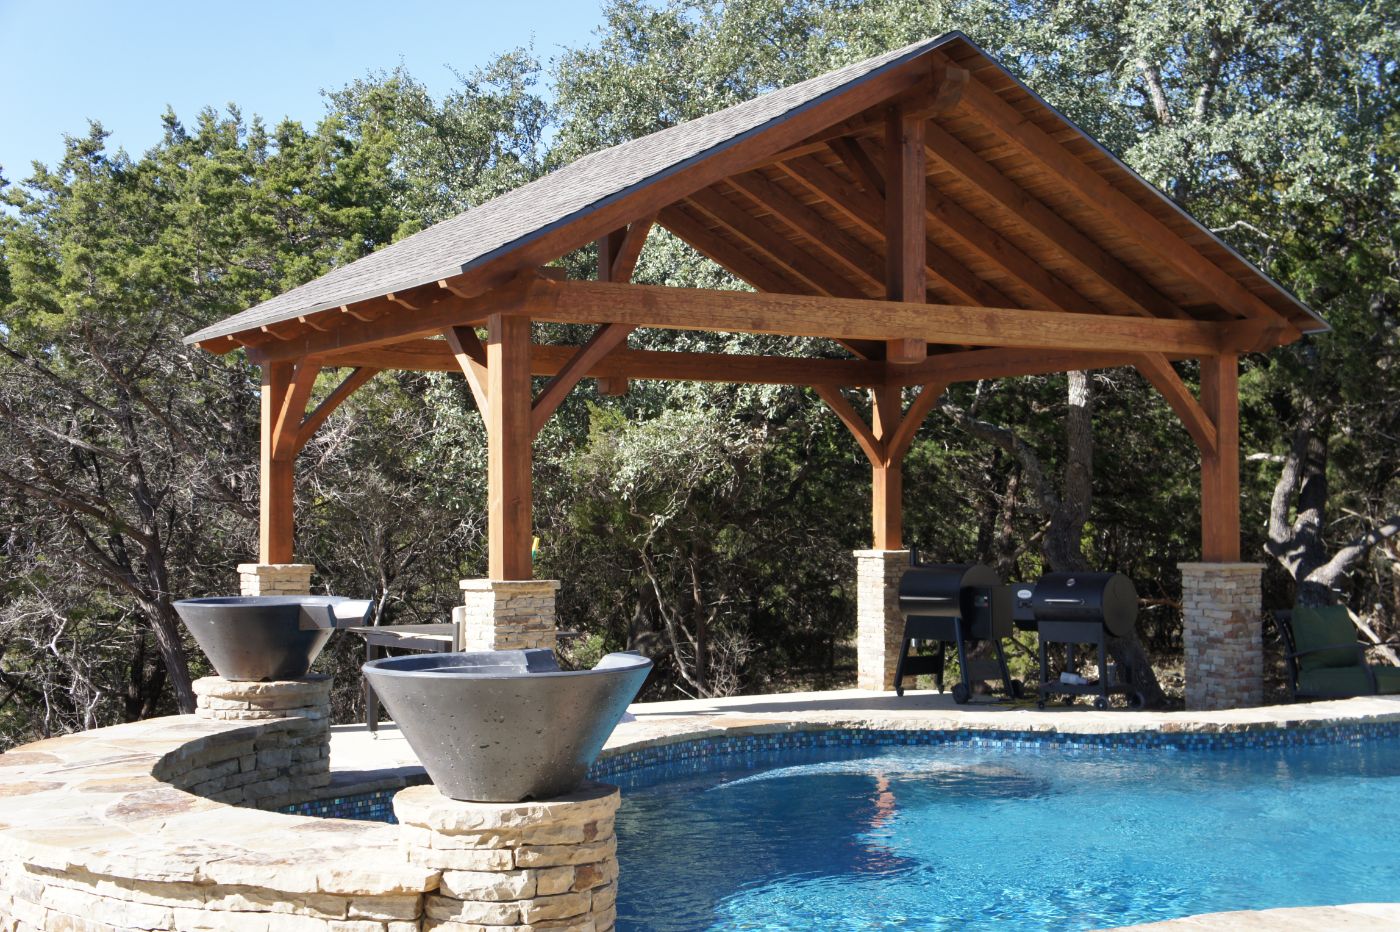 23 x 17, concrete or cement pad, patio furniture, kitchen or outdoor kitchen, barbecue or grill, residential, poolside or swimming pool, cabana, outdoor living, entertaining, pool house, shade structure, pavilion builder or pavilion contractor, pavilion kit, wood pavilion